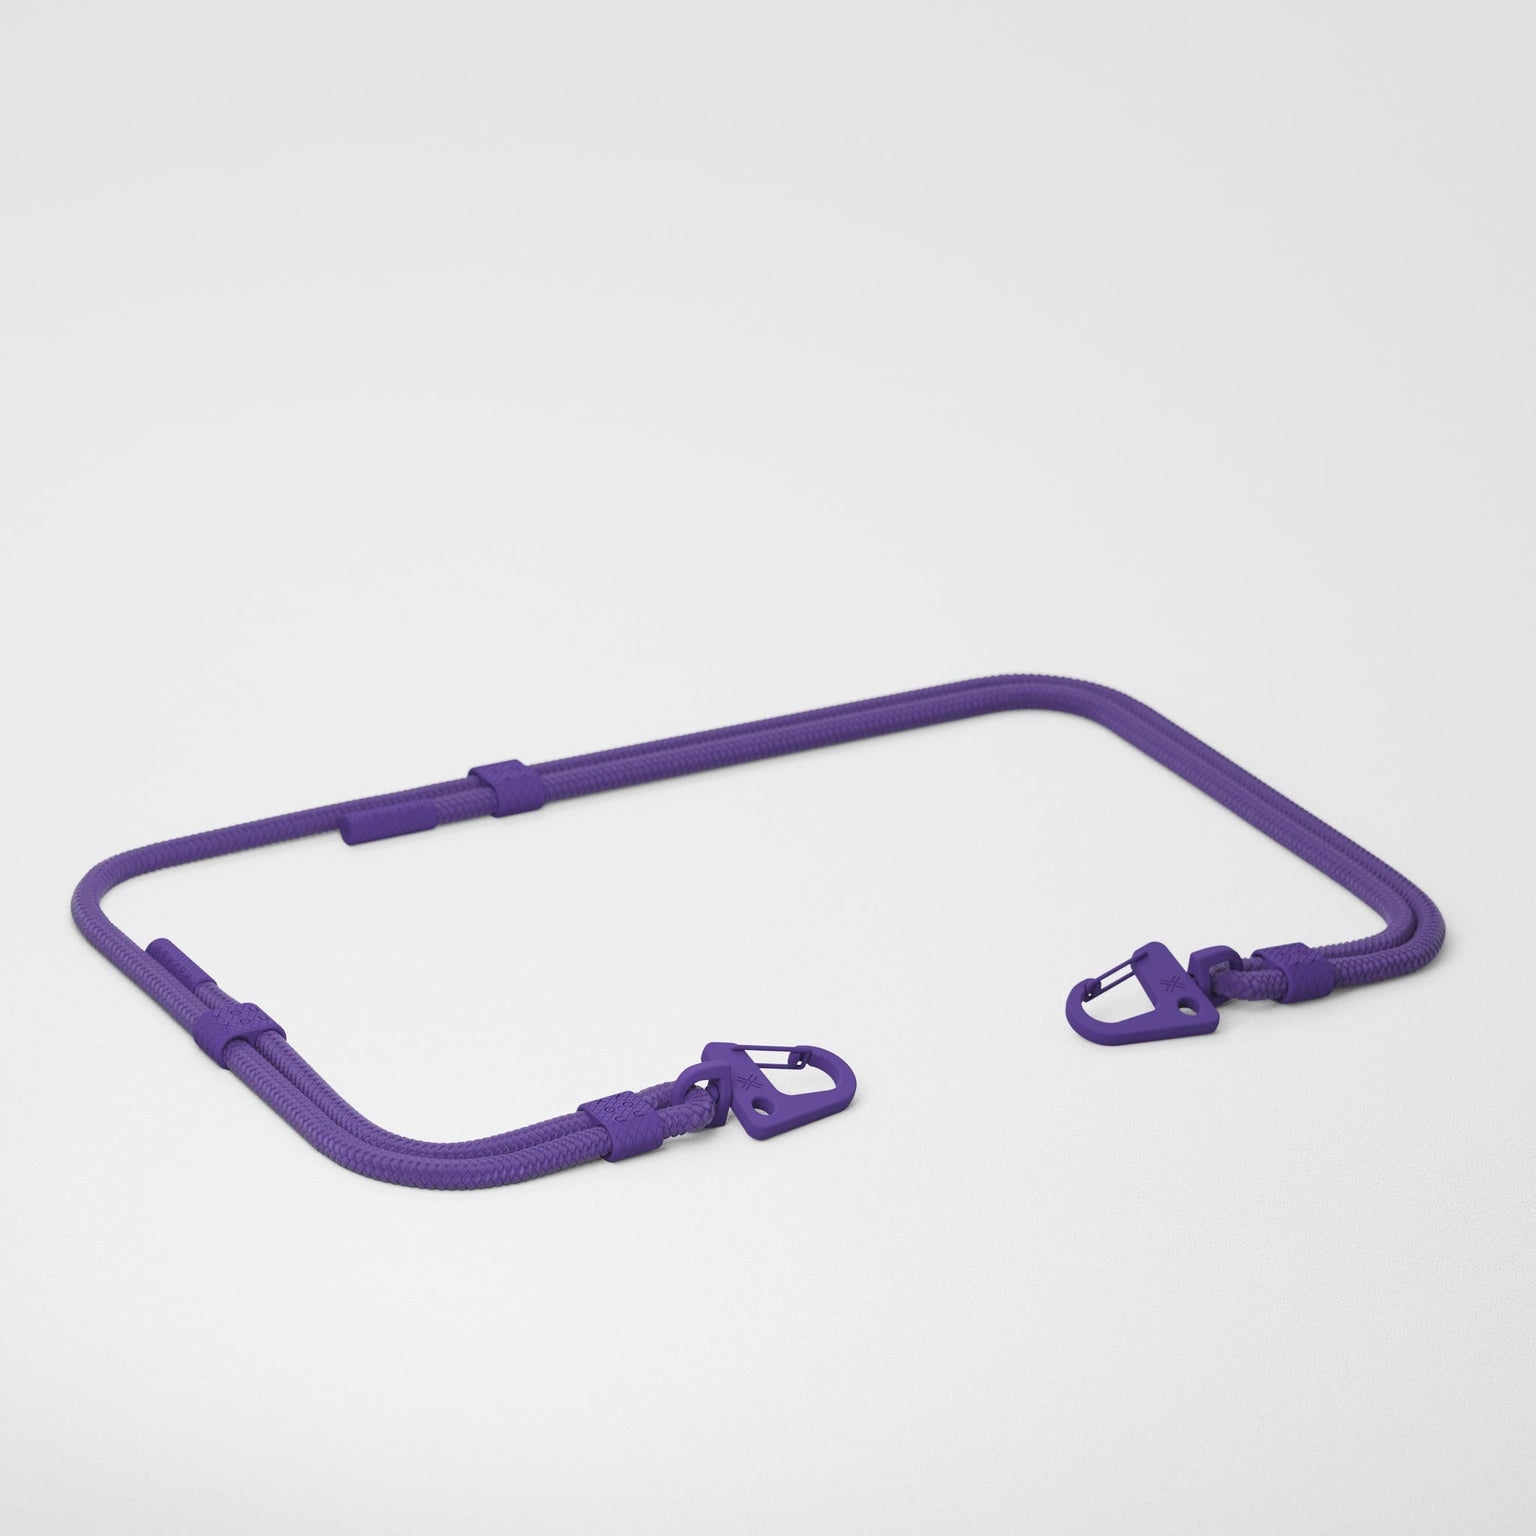 Modular Phone Strap with Carabiner in Purple | XOUXOU